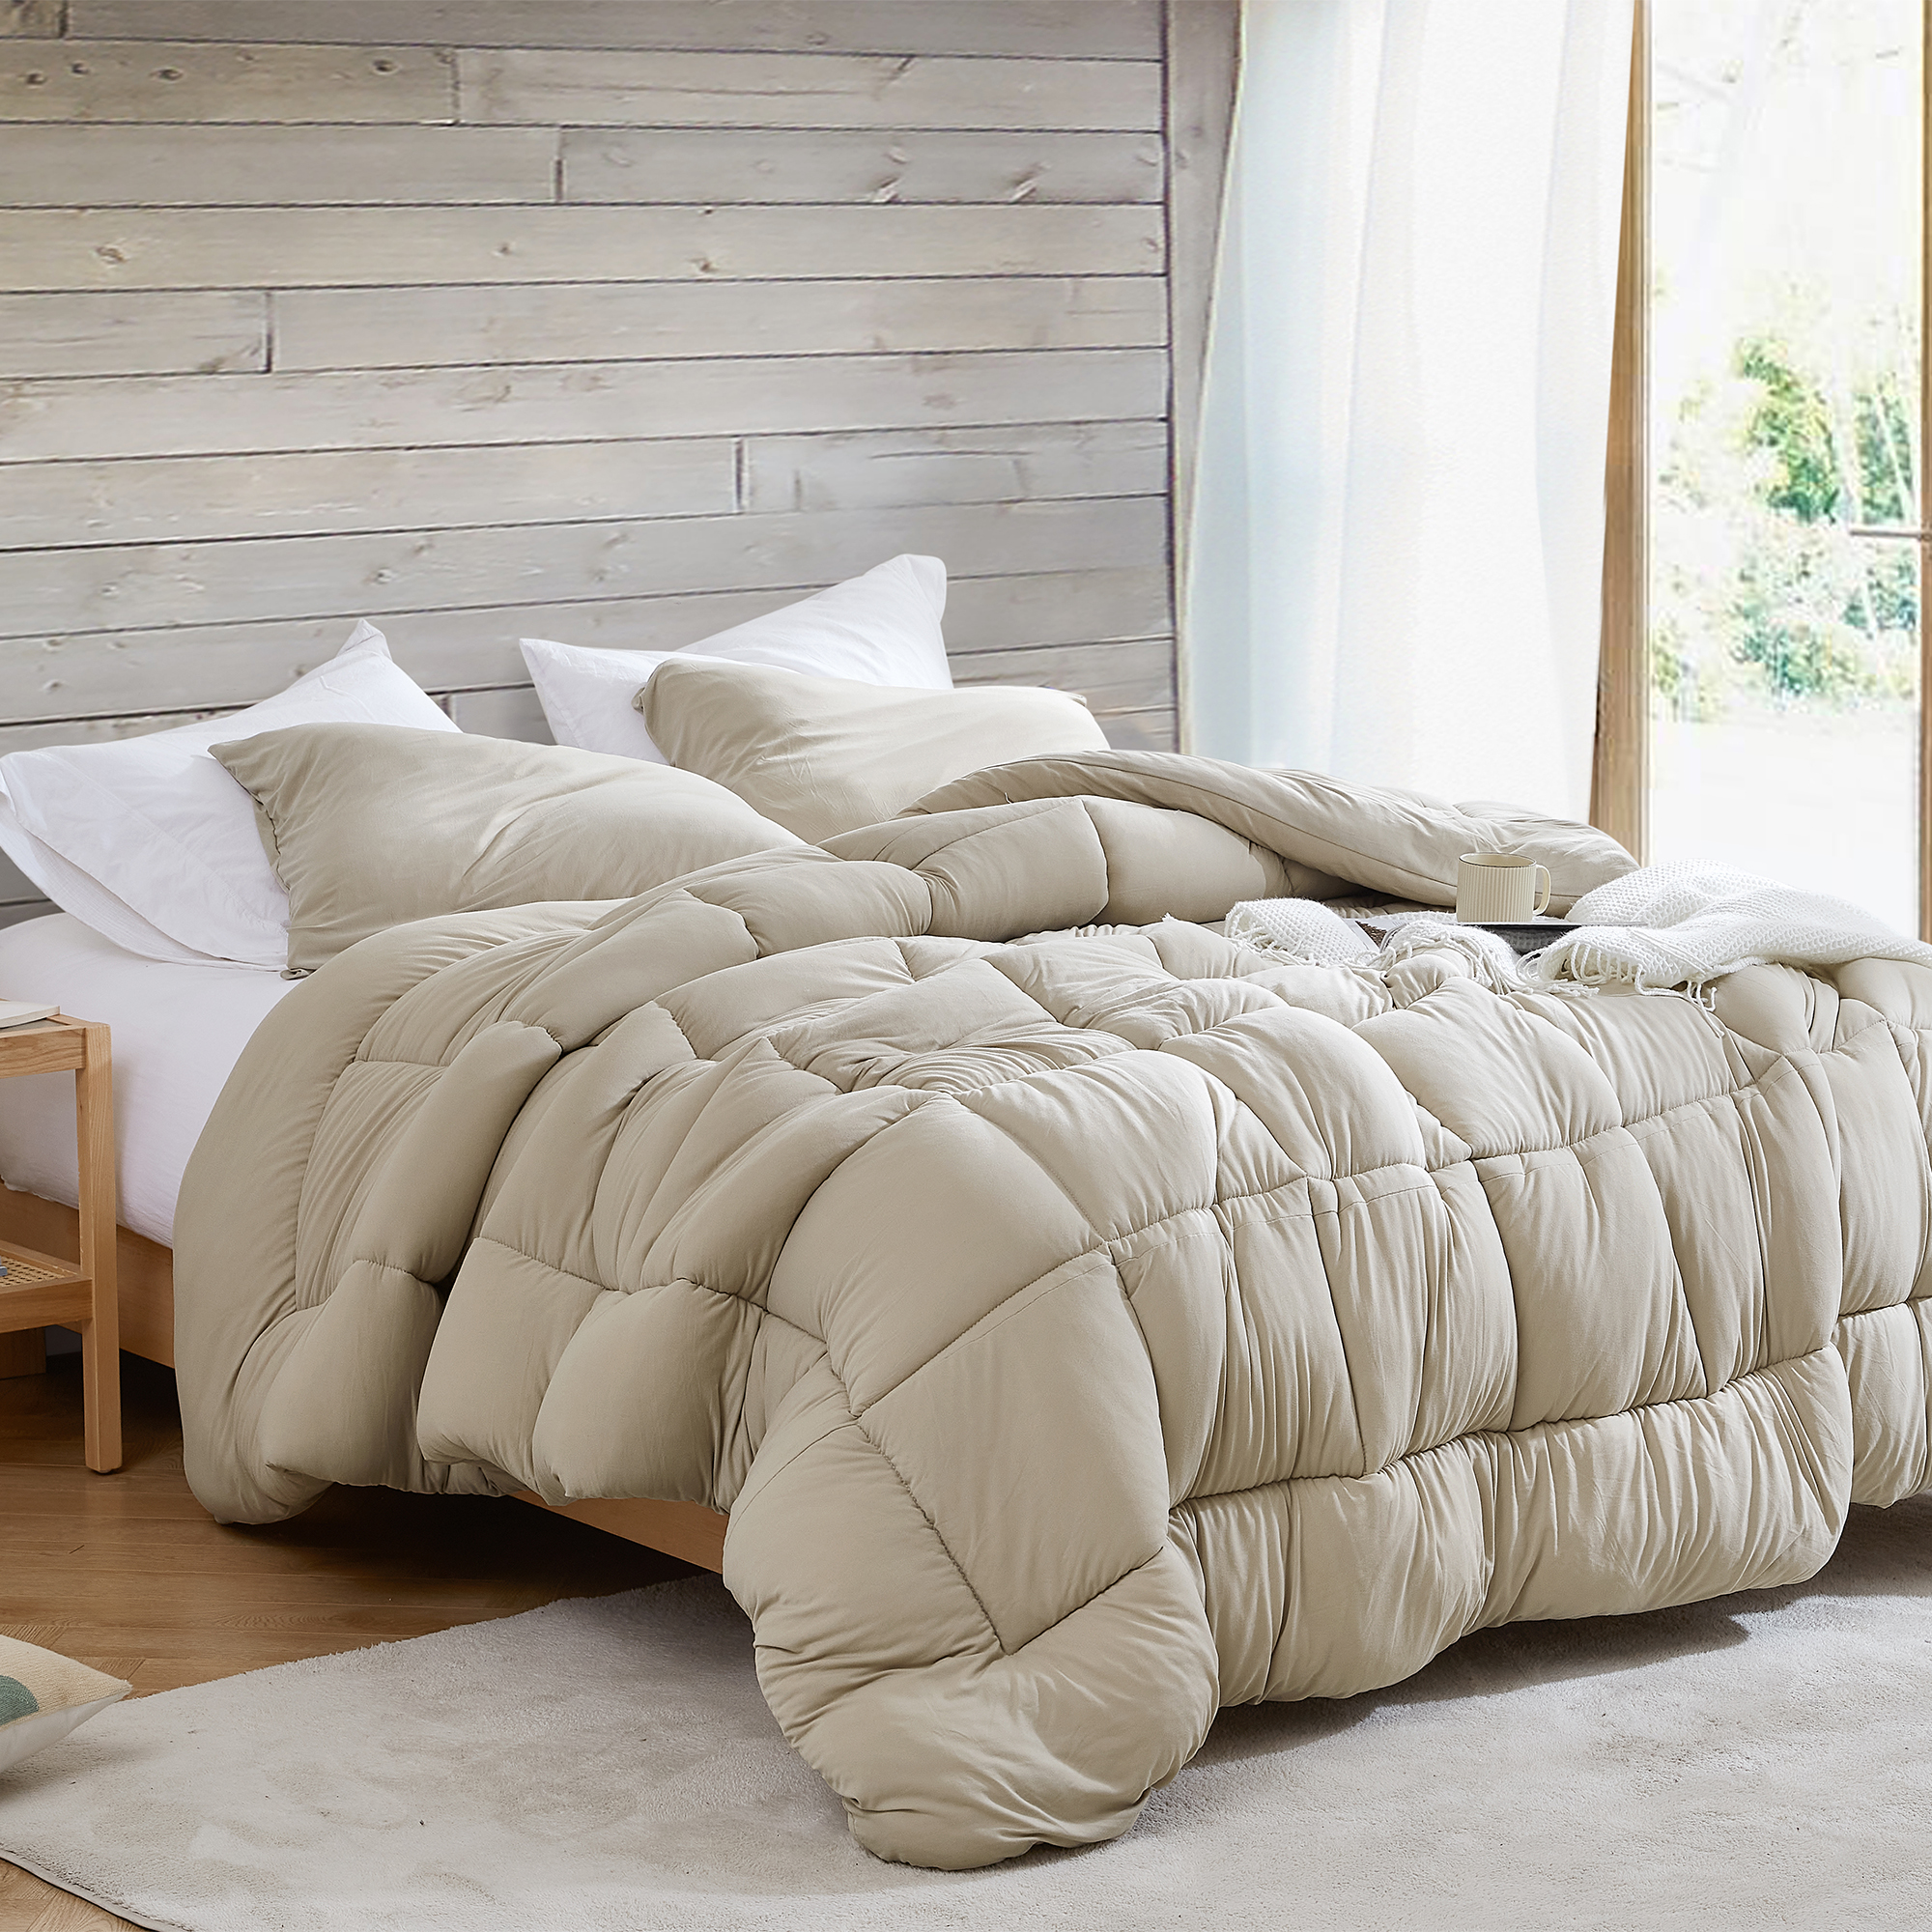 Lightweight Coma Inducer Bedding Summertime Comforter for Warm Sleepers